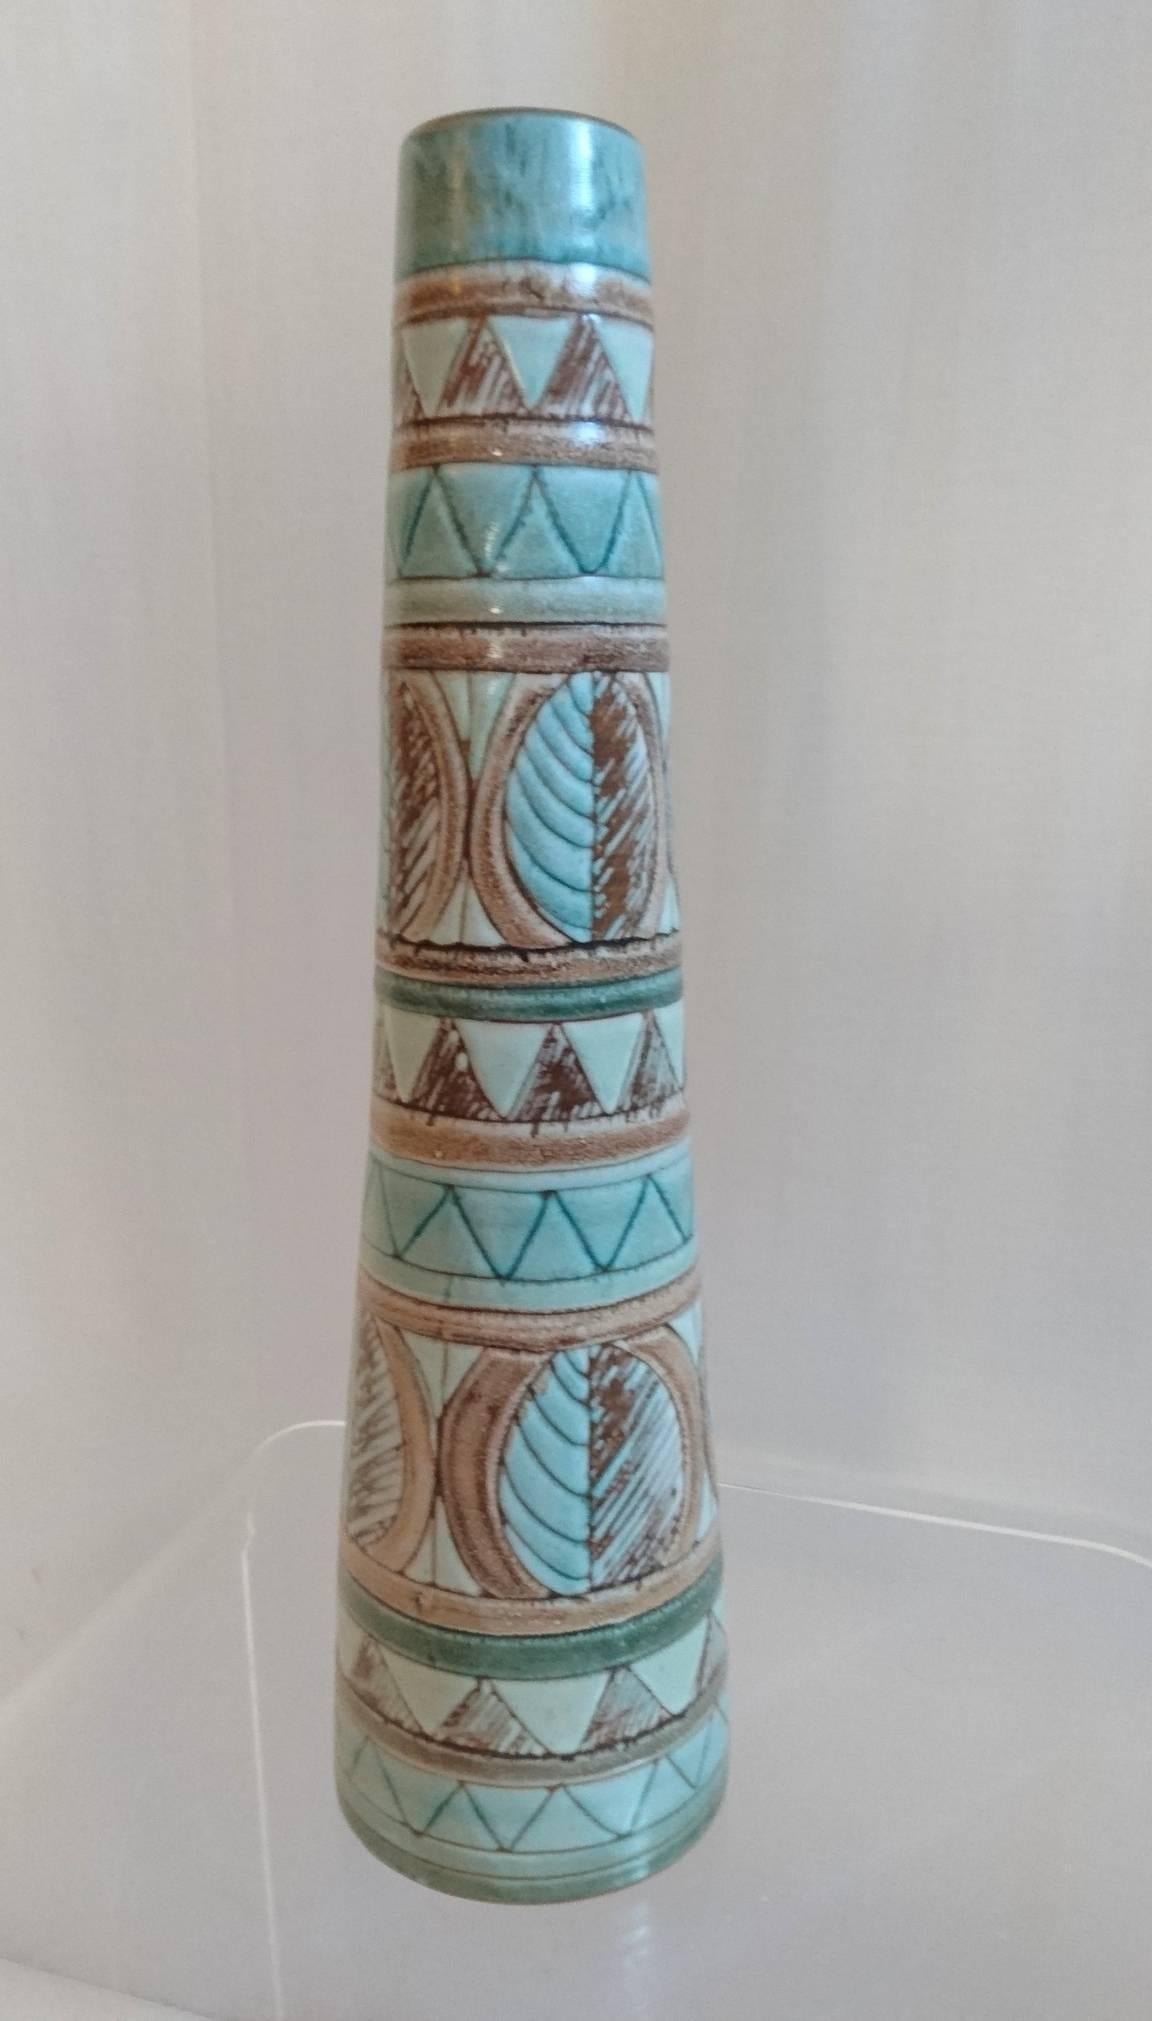 Tall cone shaped ceramic vase from the 1950s with leaves, stripes and triangles in pale turquoise/blue and browns.